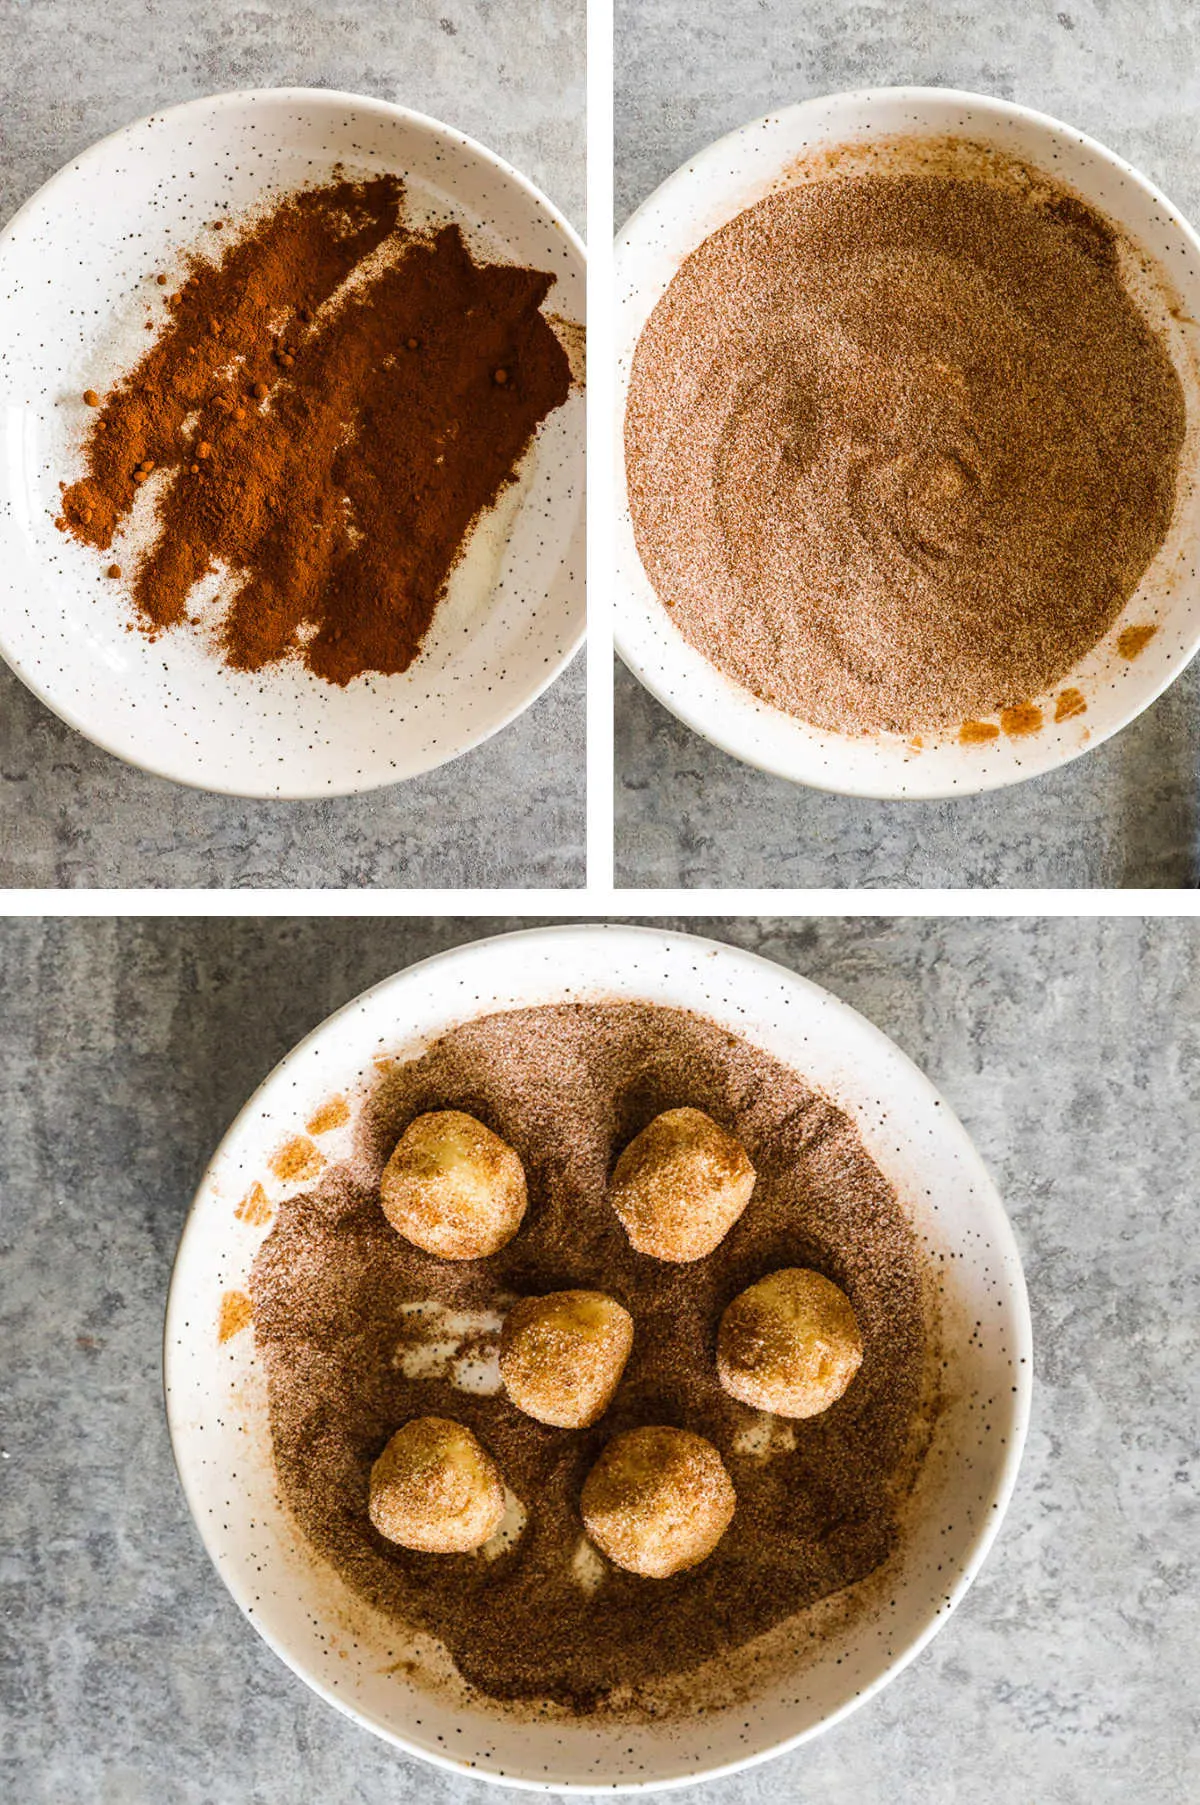 Three overhead images in one: 1. Cinnamon added to shallow white bowl. 2. Sugar added to cinnamon. 3. Round dough balls rolled in cinnamon and sugar. 